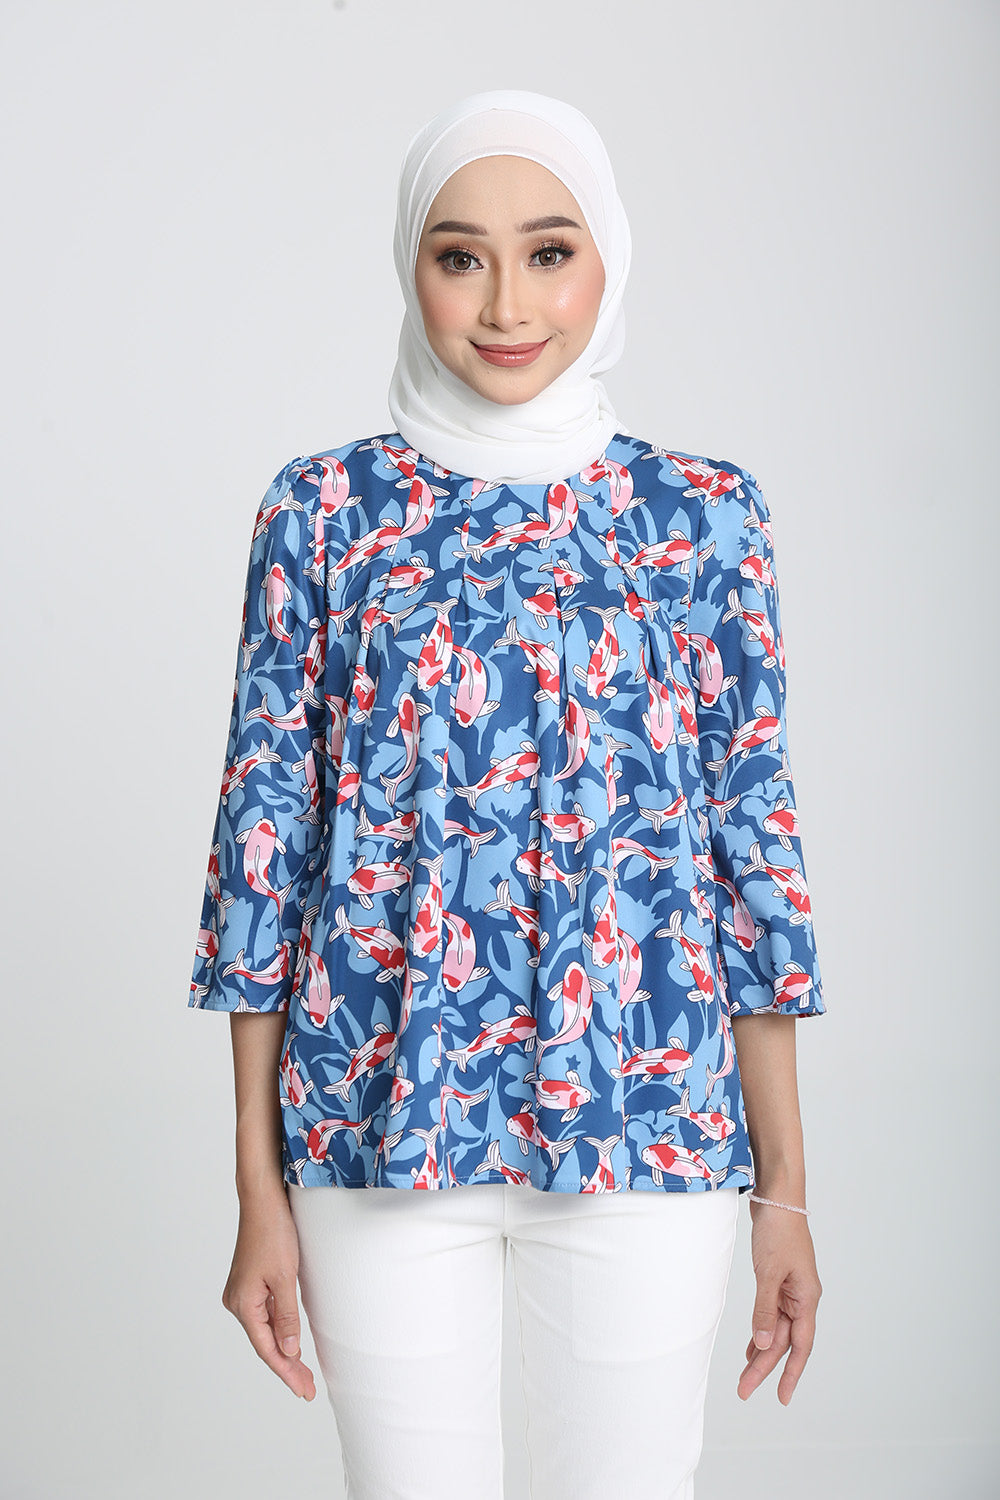 The Reunion Moments Blouse in Koi Prints